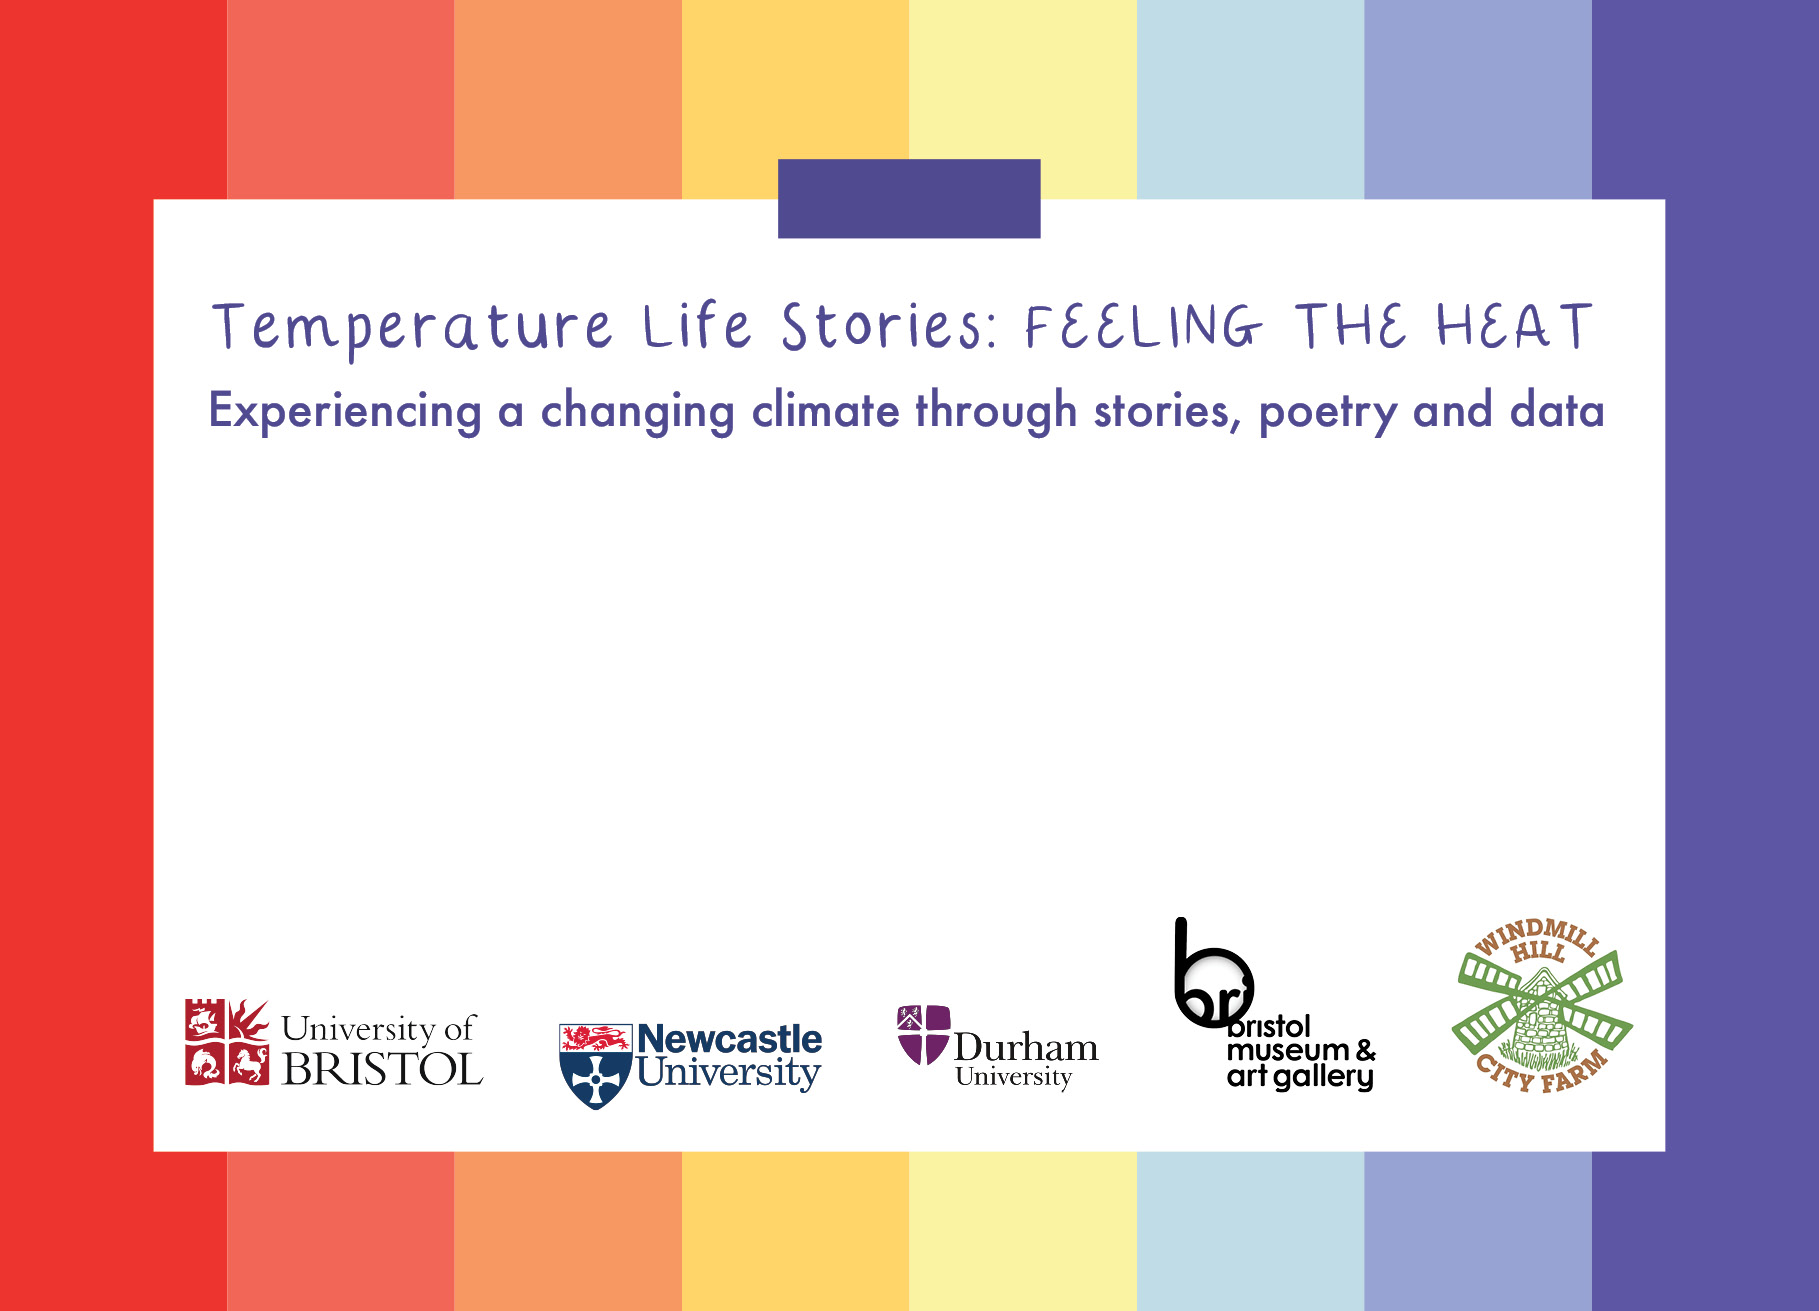 Publicity image for Temperature Stories with logos of sponsoring organisations 